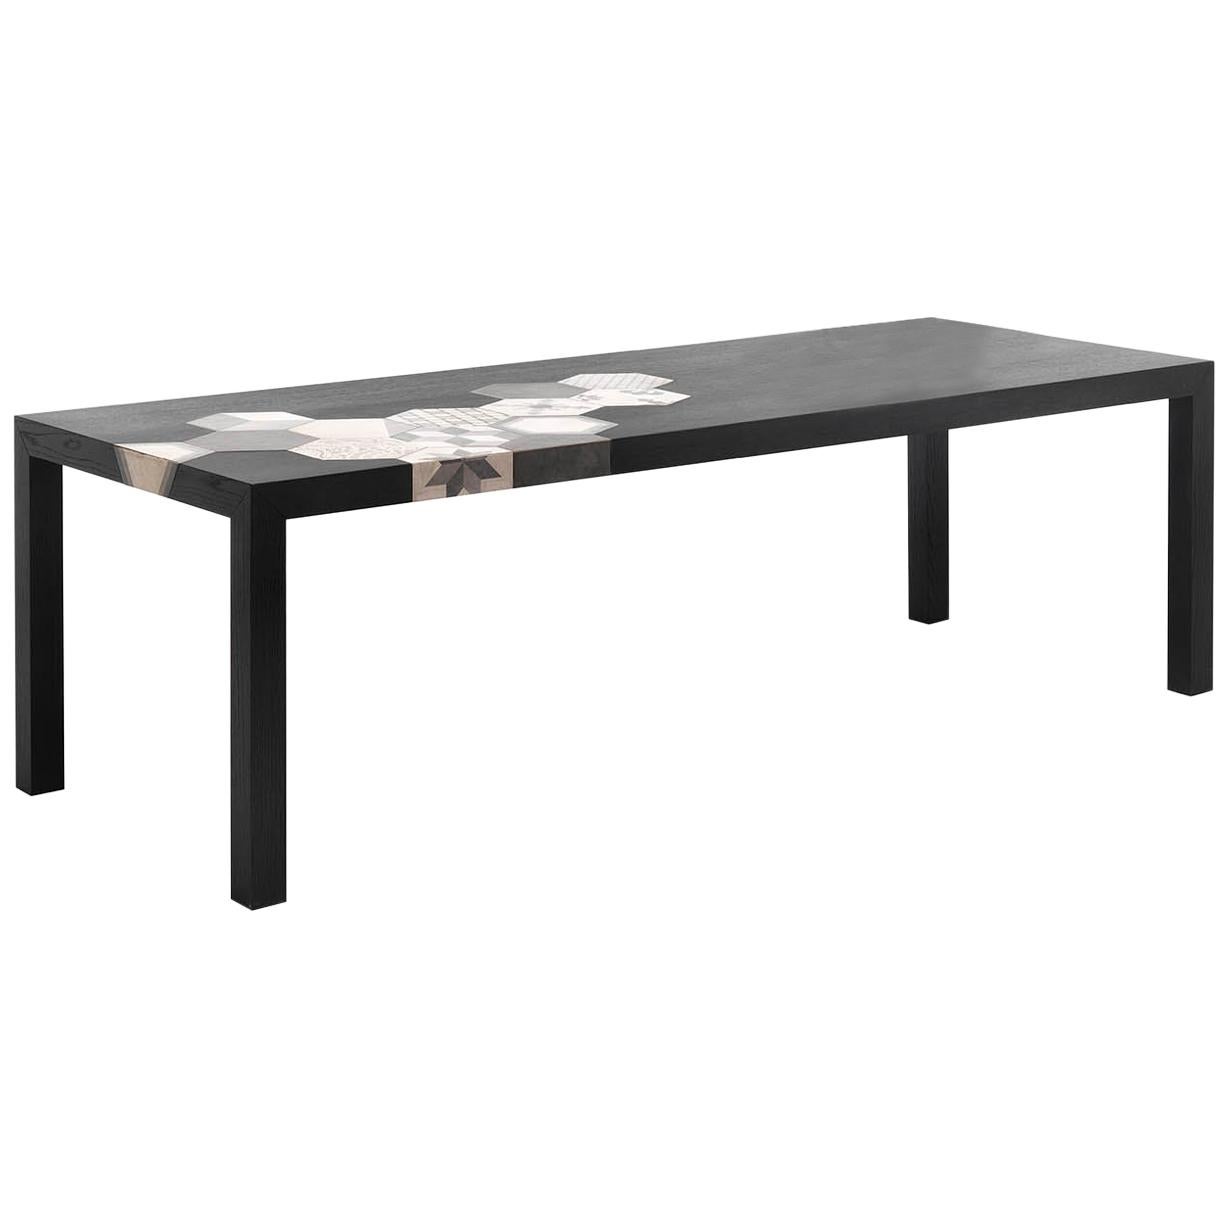 Extra-Large Cementino Dining Table in Black Finish by Mogg For Sale